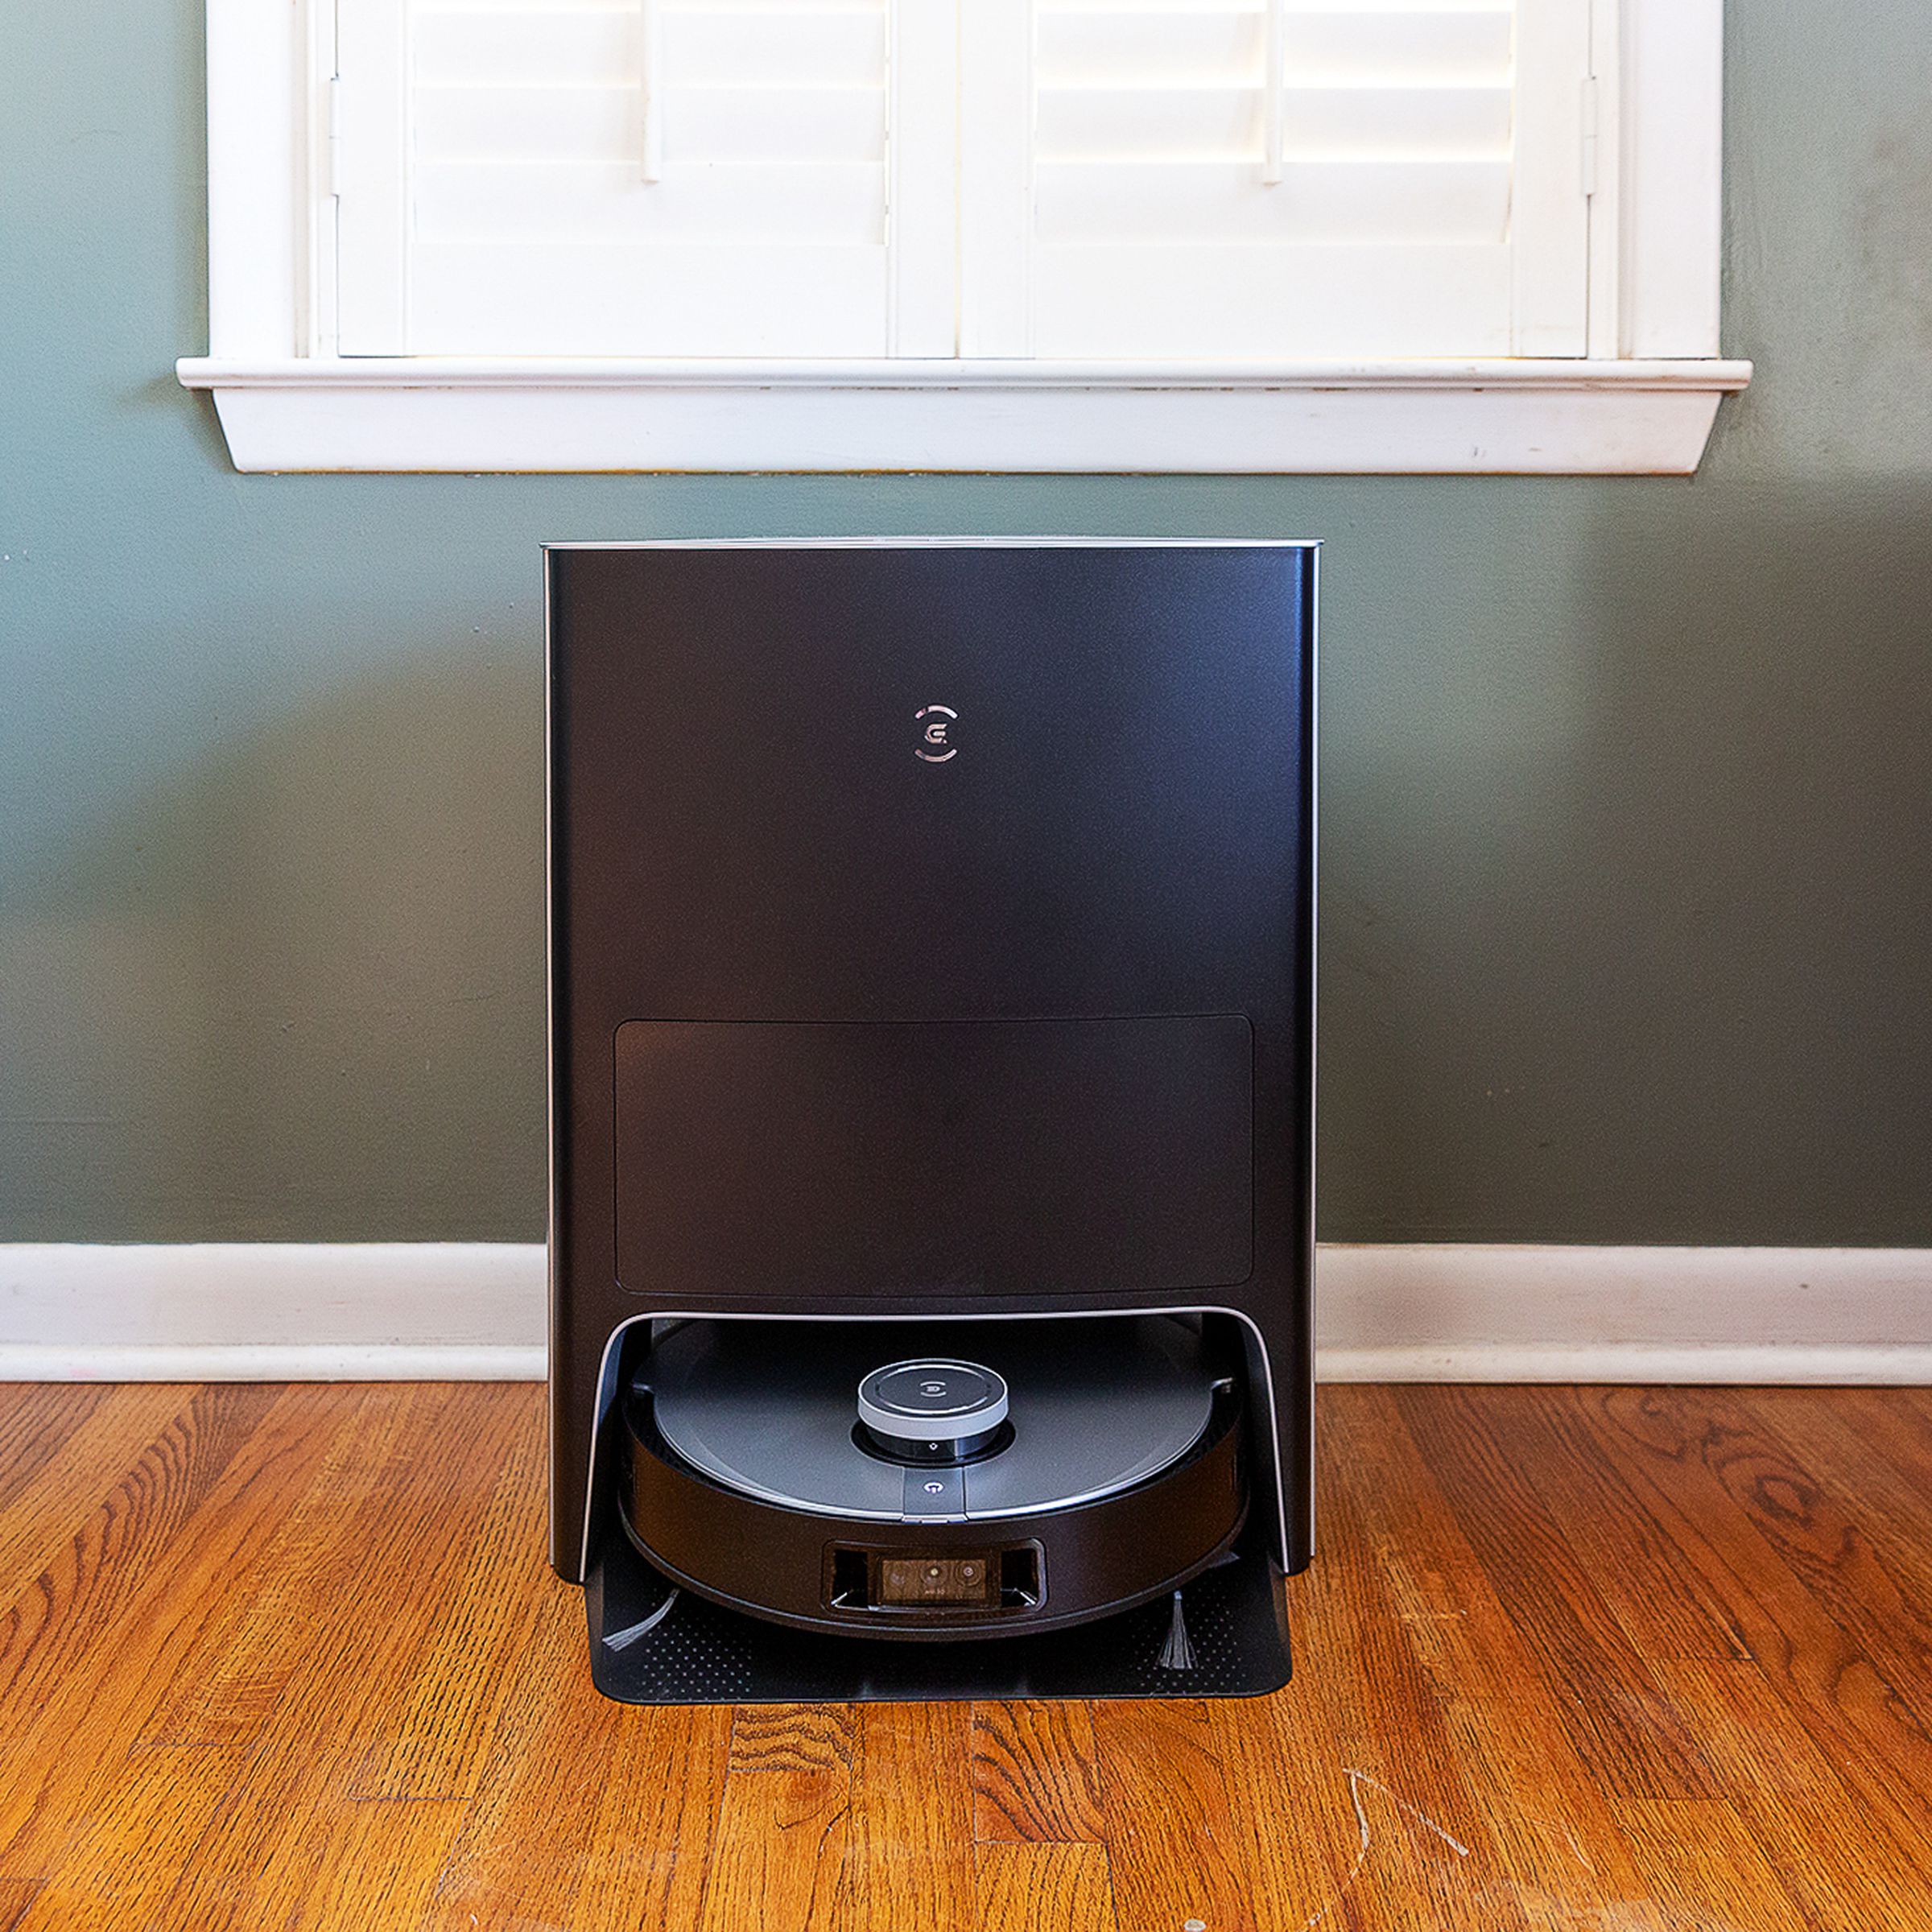 An Ecovacs Deebot X1 Omni robot vacuum, docked in its self-cleaning station in a living room.